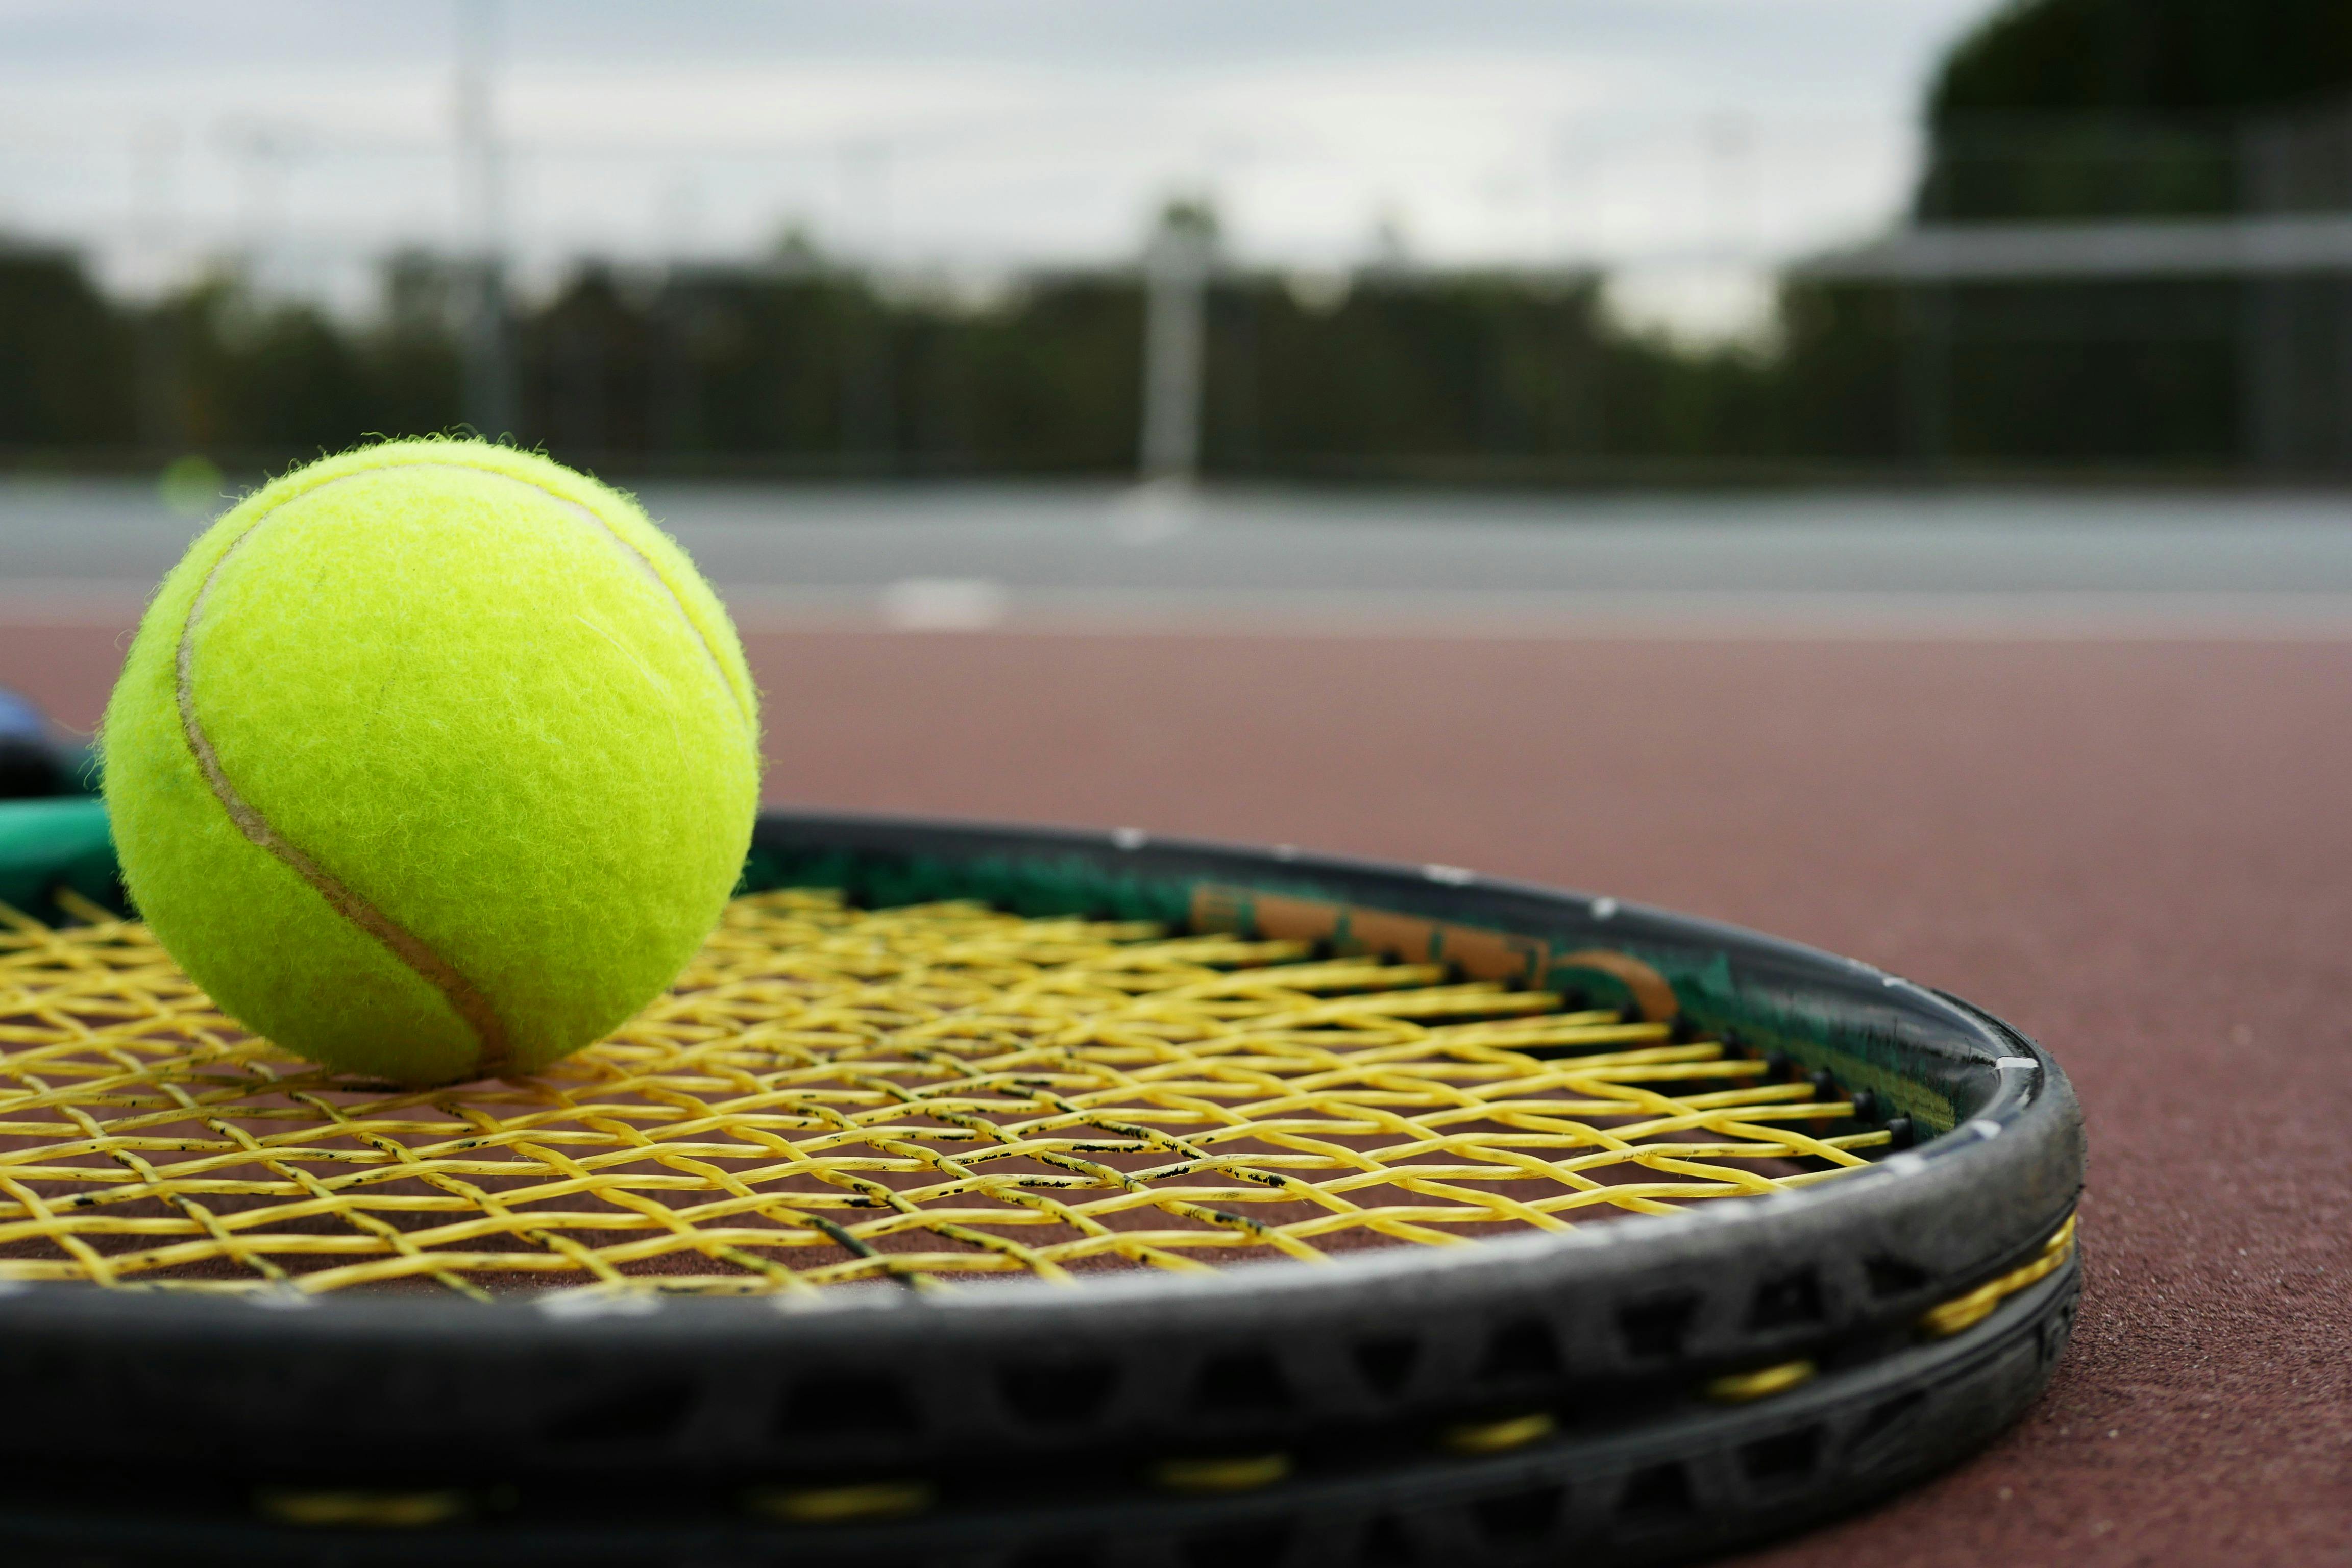 Close Up Of A Tennis Racket And Balls Lying On A Court